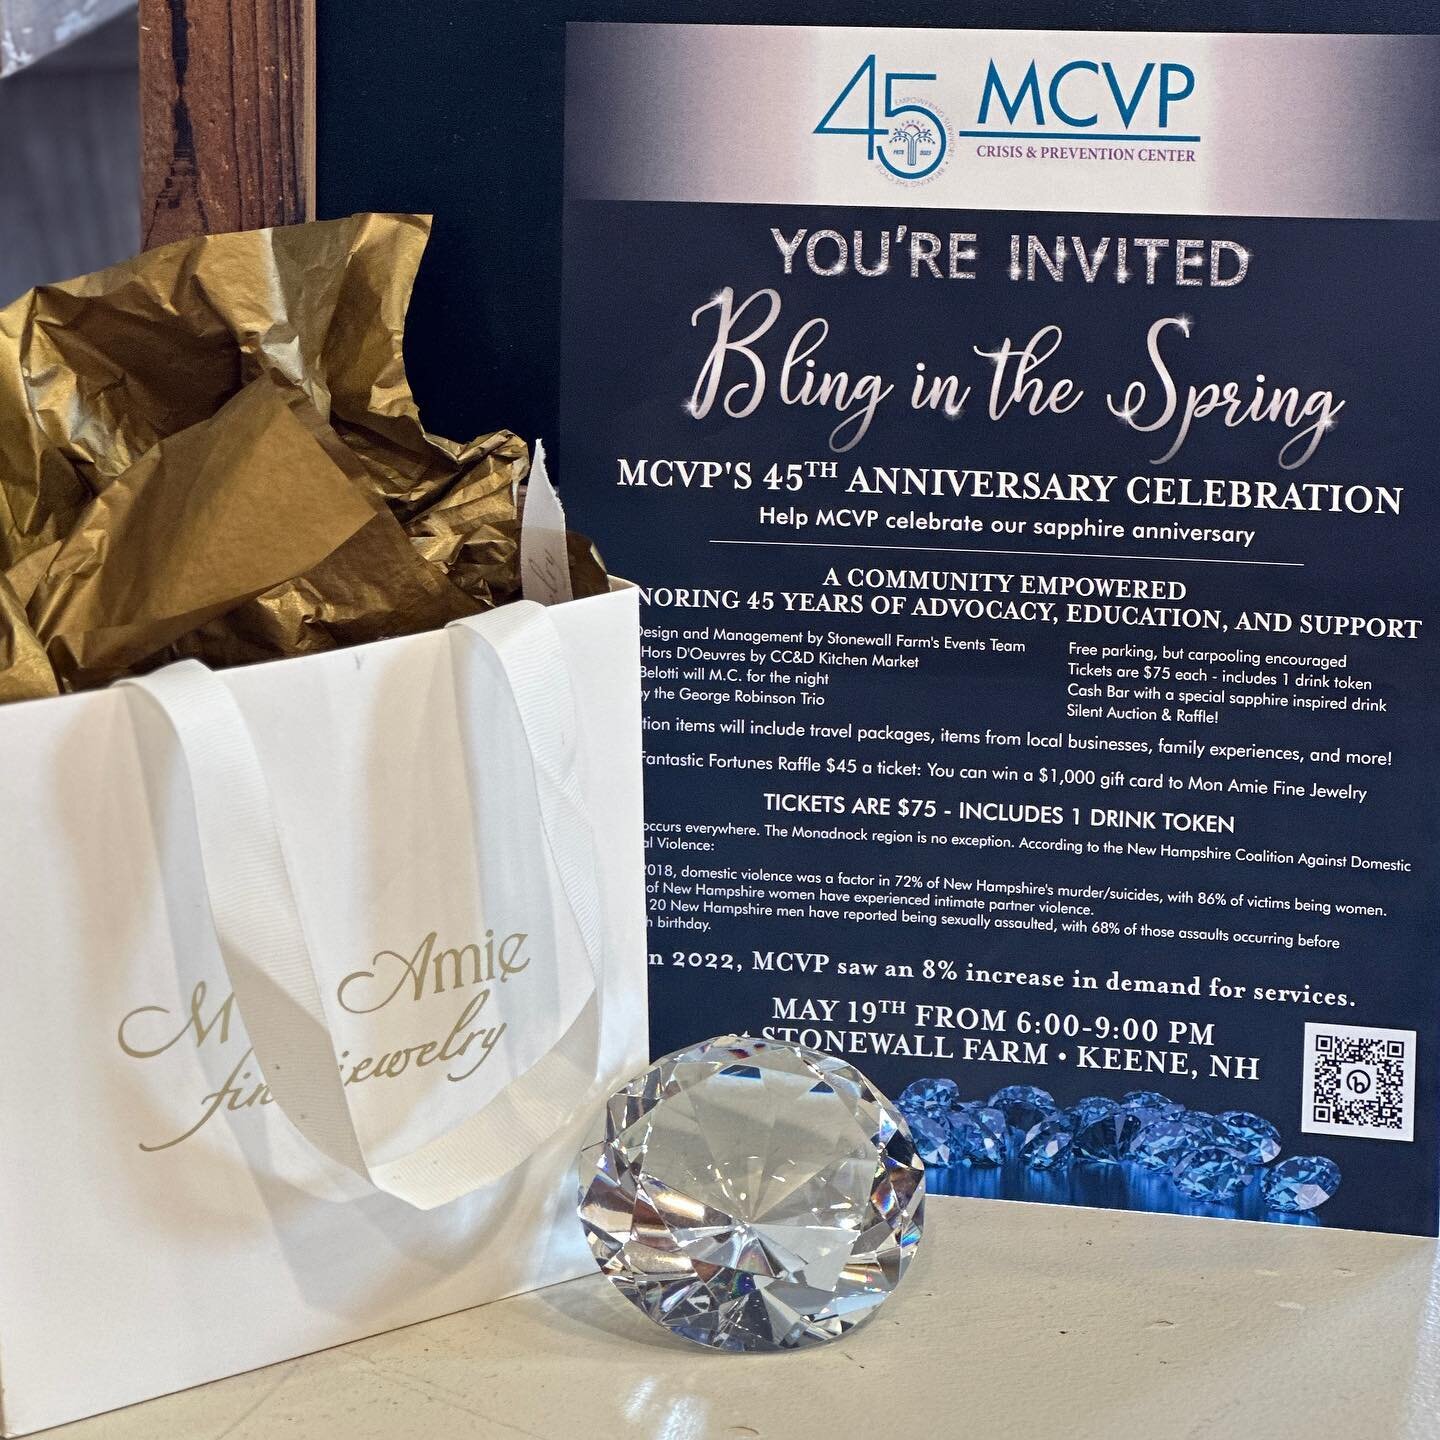 Bling in the Spring event is tonight! Join Monadnock Center for Violence Prevention in their 45th anniversary celebration! 🤩

Celebration is tonight from 6:00-9:00 PM at Stonewall Farm in Keene, NH! 🤍

&ldquo;If you are attending, you're in for a t